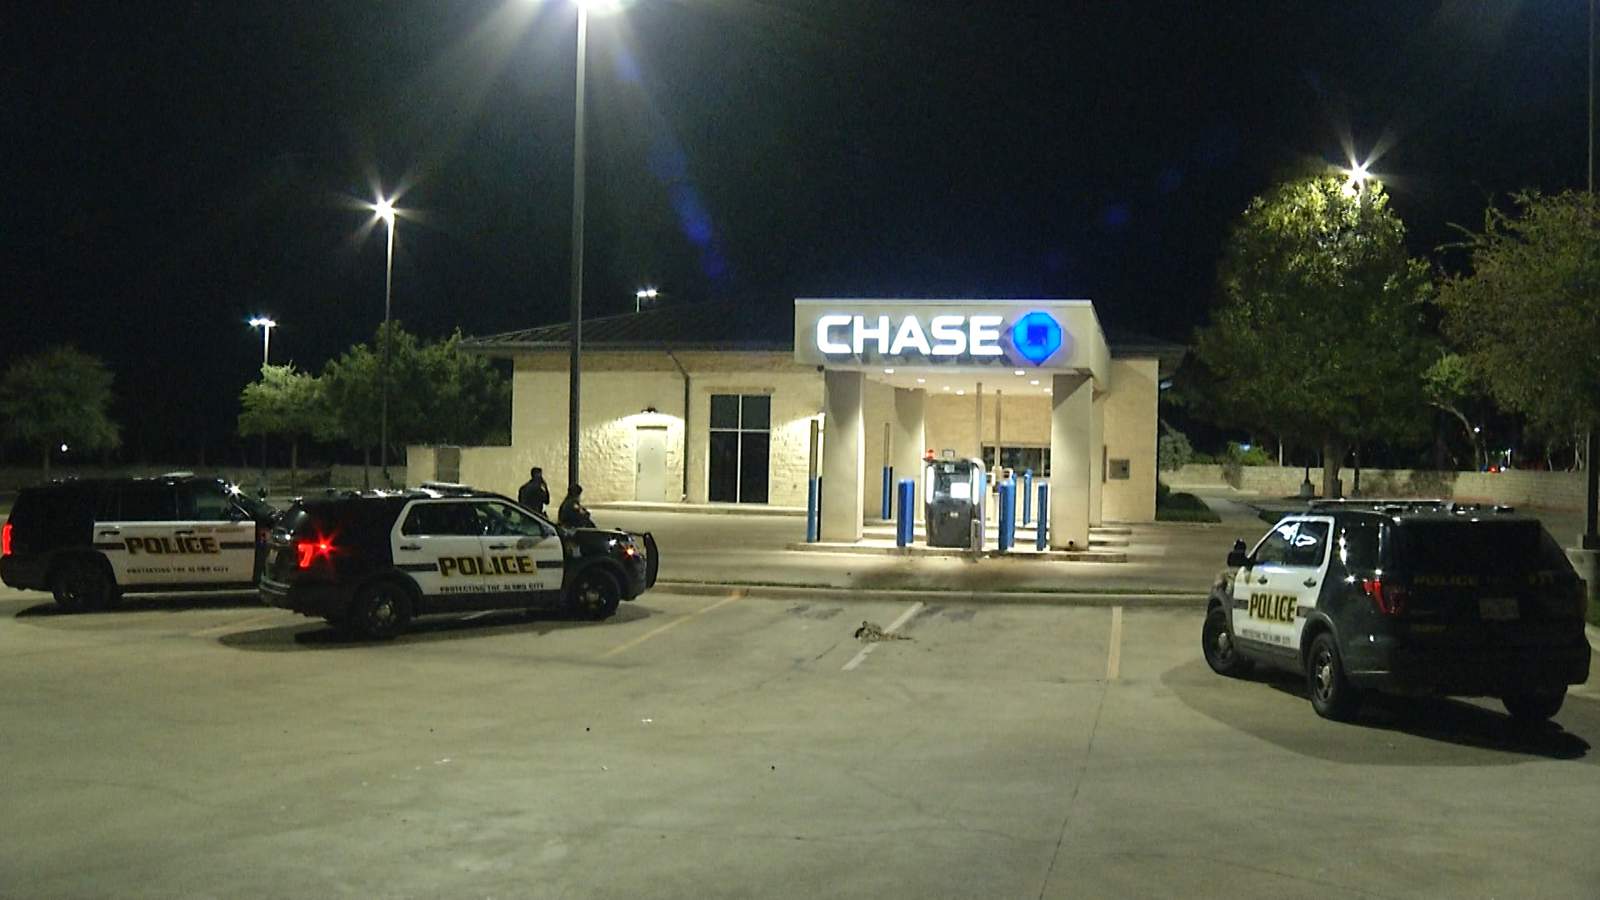 Thieves fail in attempt to break into ATM at Chase Bank, police say